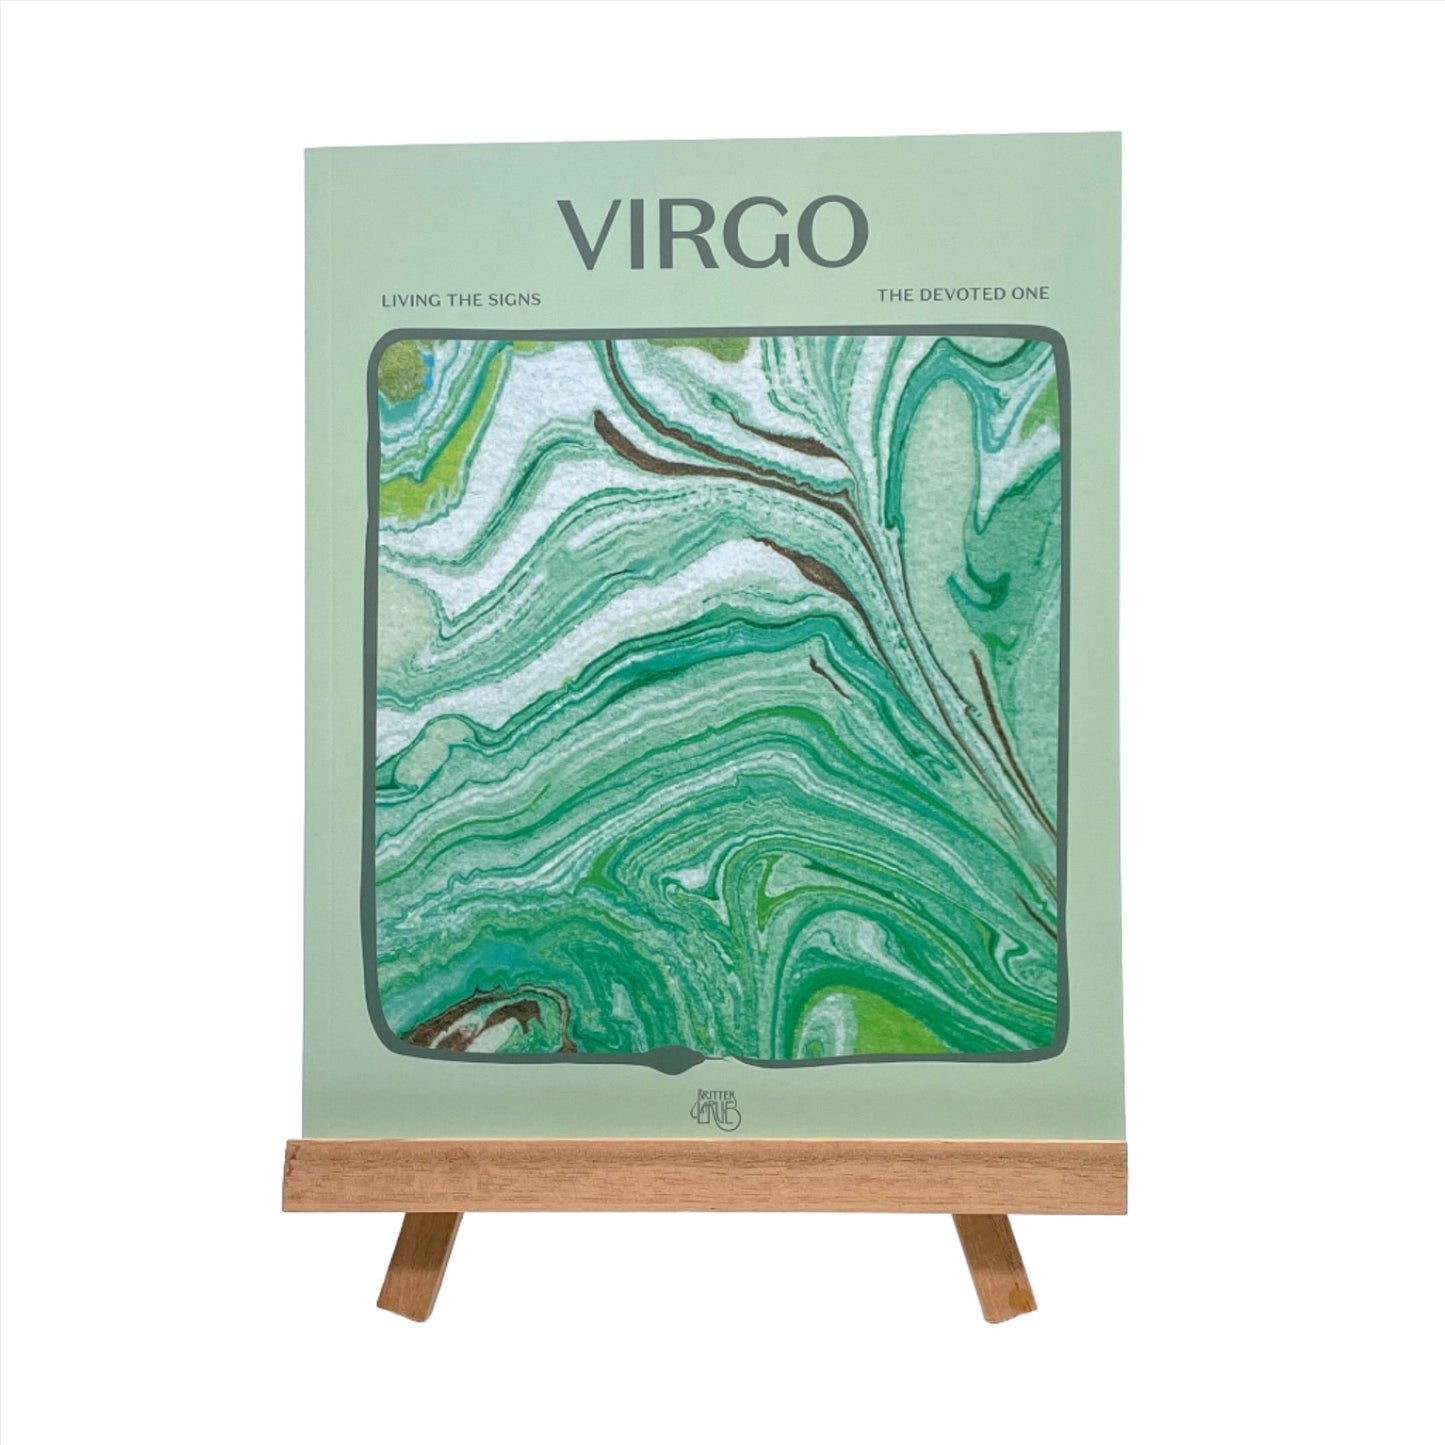 Living the Signs: Virgo